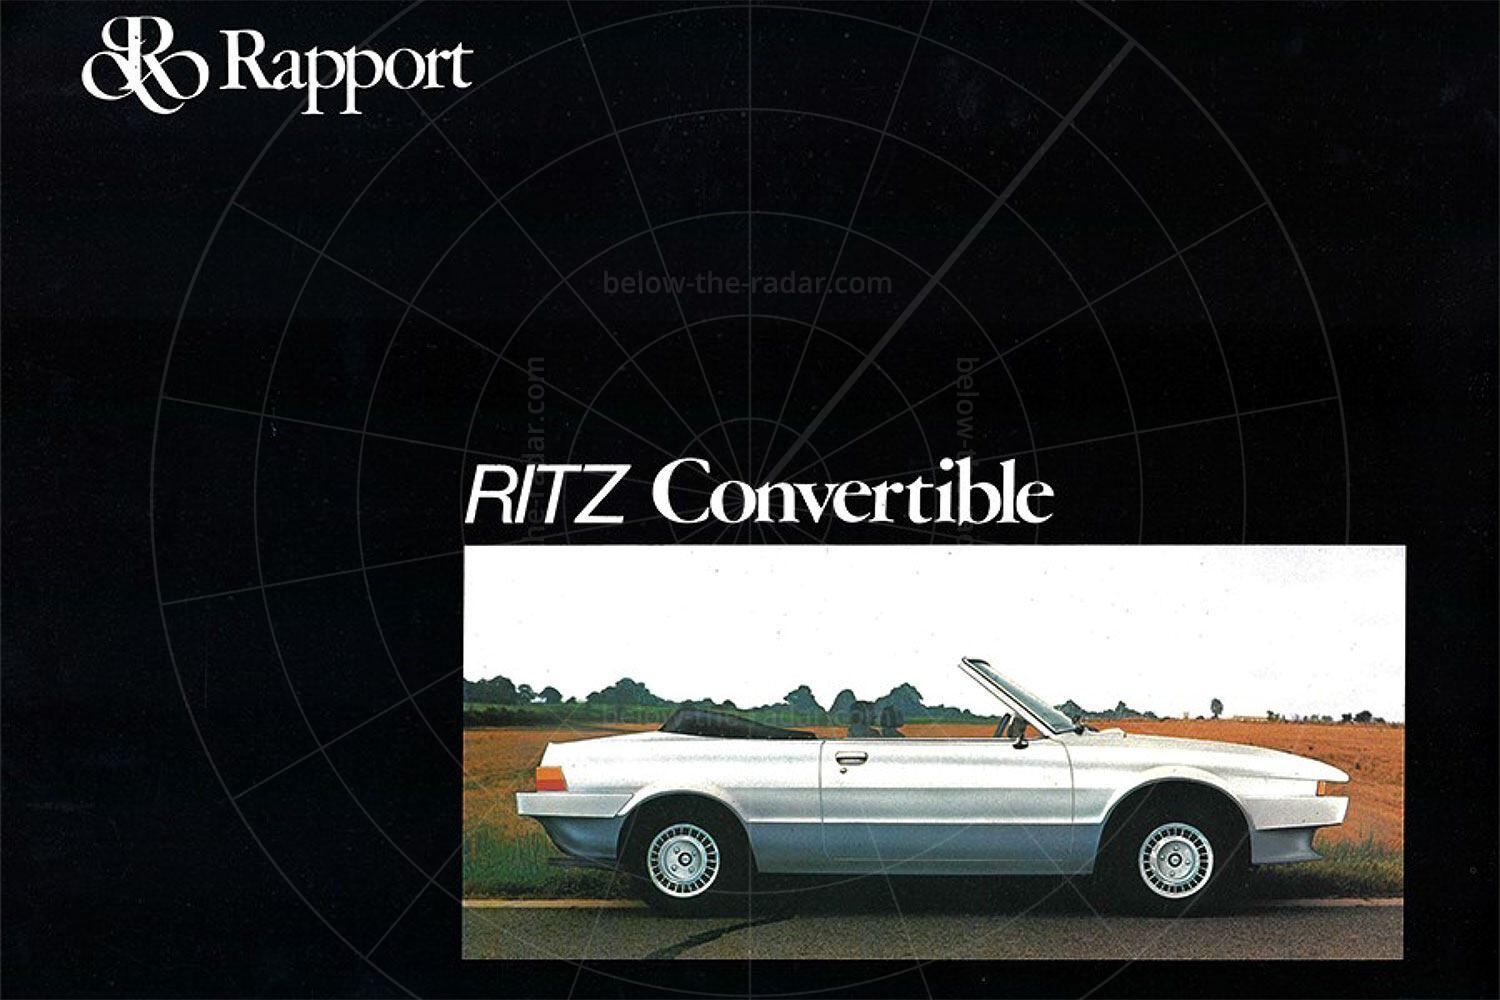 Rapport Ritz convertible from the sales brochure Pic: magiccarpics.co.uk | Rapport Ritz convertible from the sales brochure